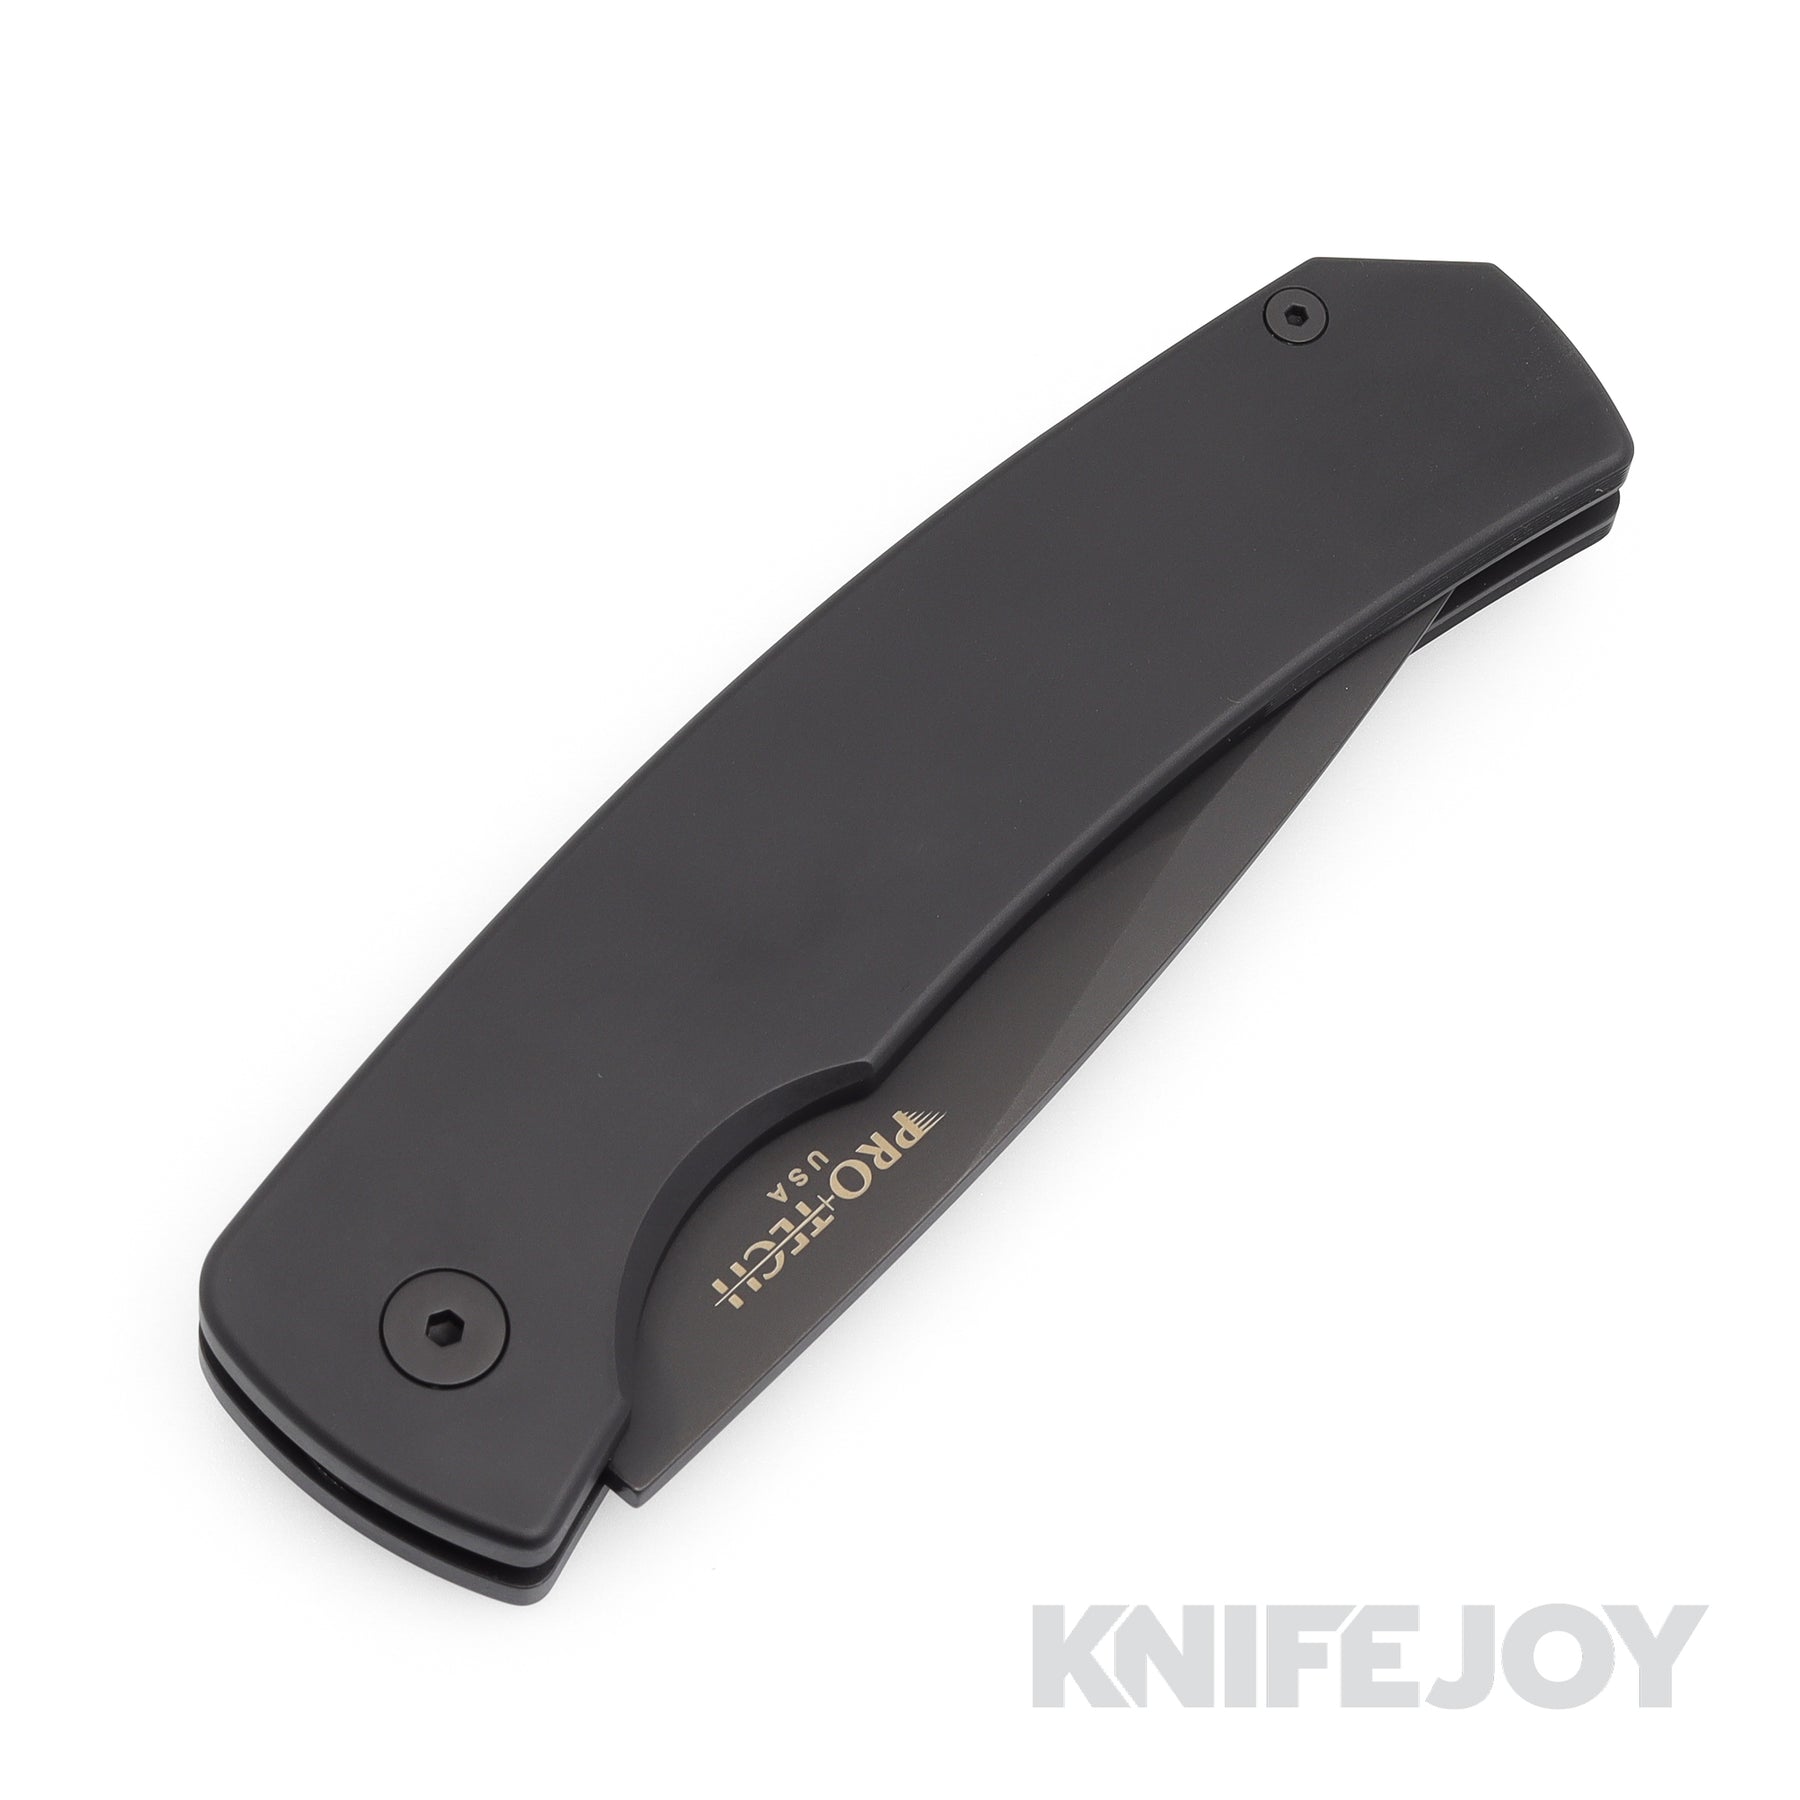 Stream Get the best Protech knives online From Perry Knife Works by John123